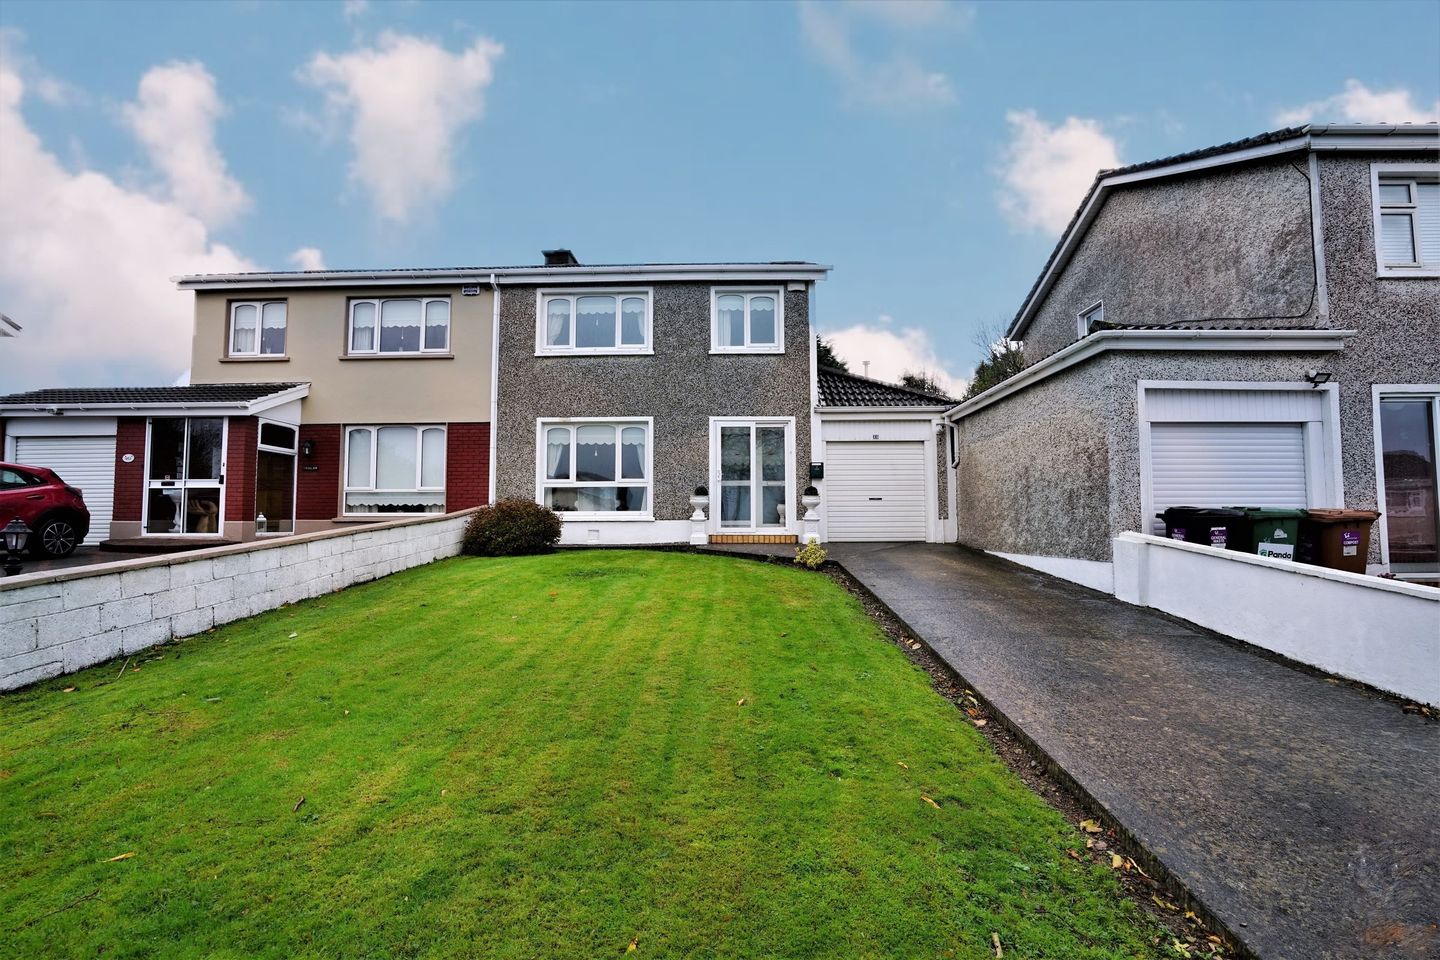 46 Hawthorn Drive, Hillview, Waterford City, Co. Waterford